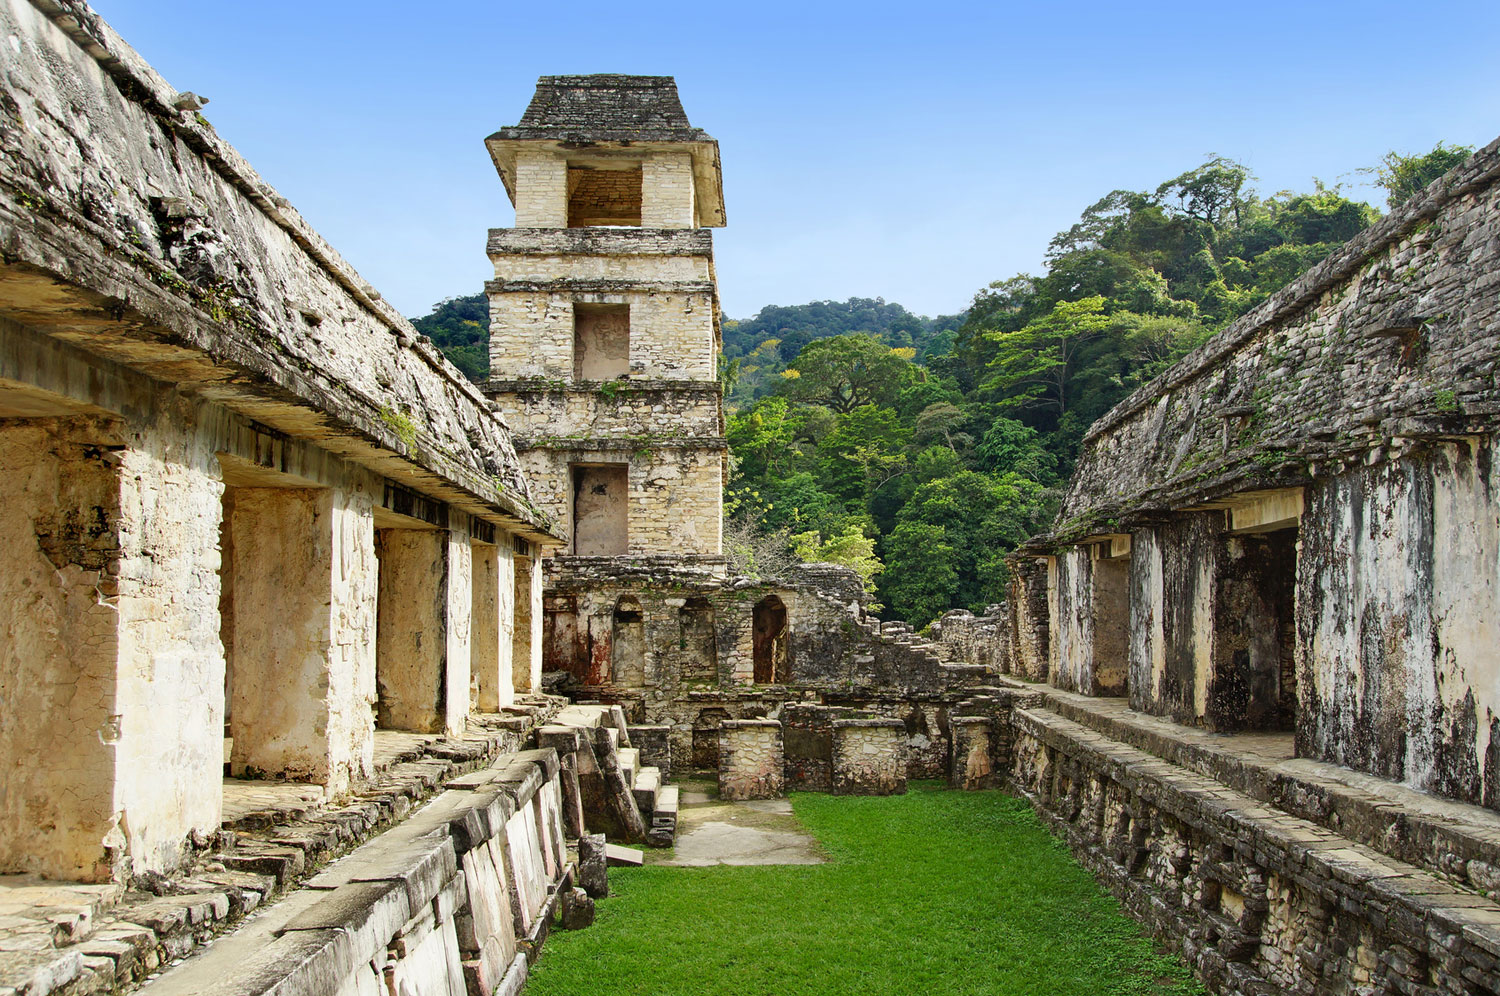 The Ultimate 13 day Mexico and Guatemala Multi-Day Tour | Group Discount Rate $2699.00 US dollars per person